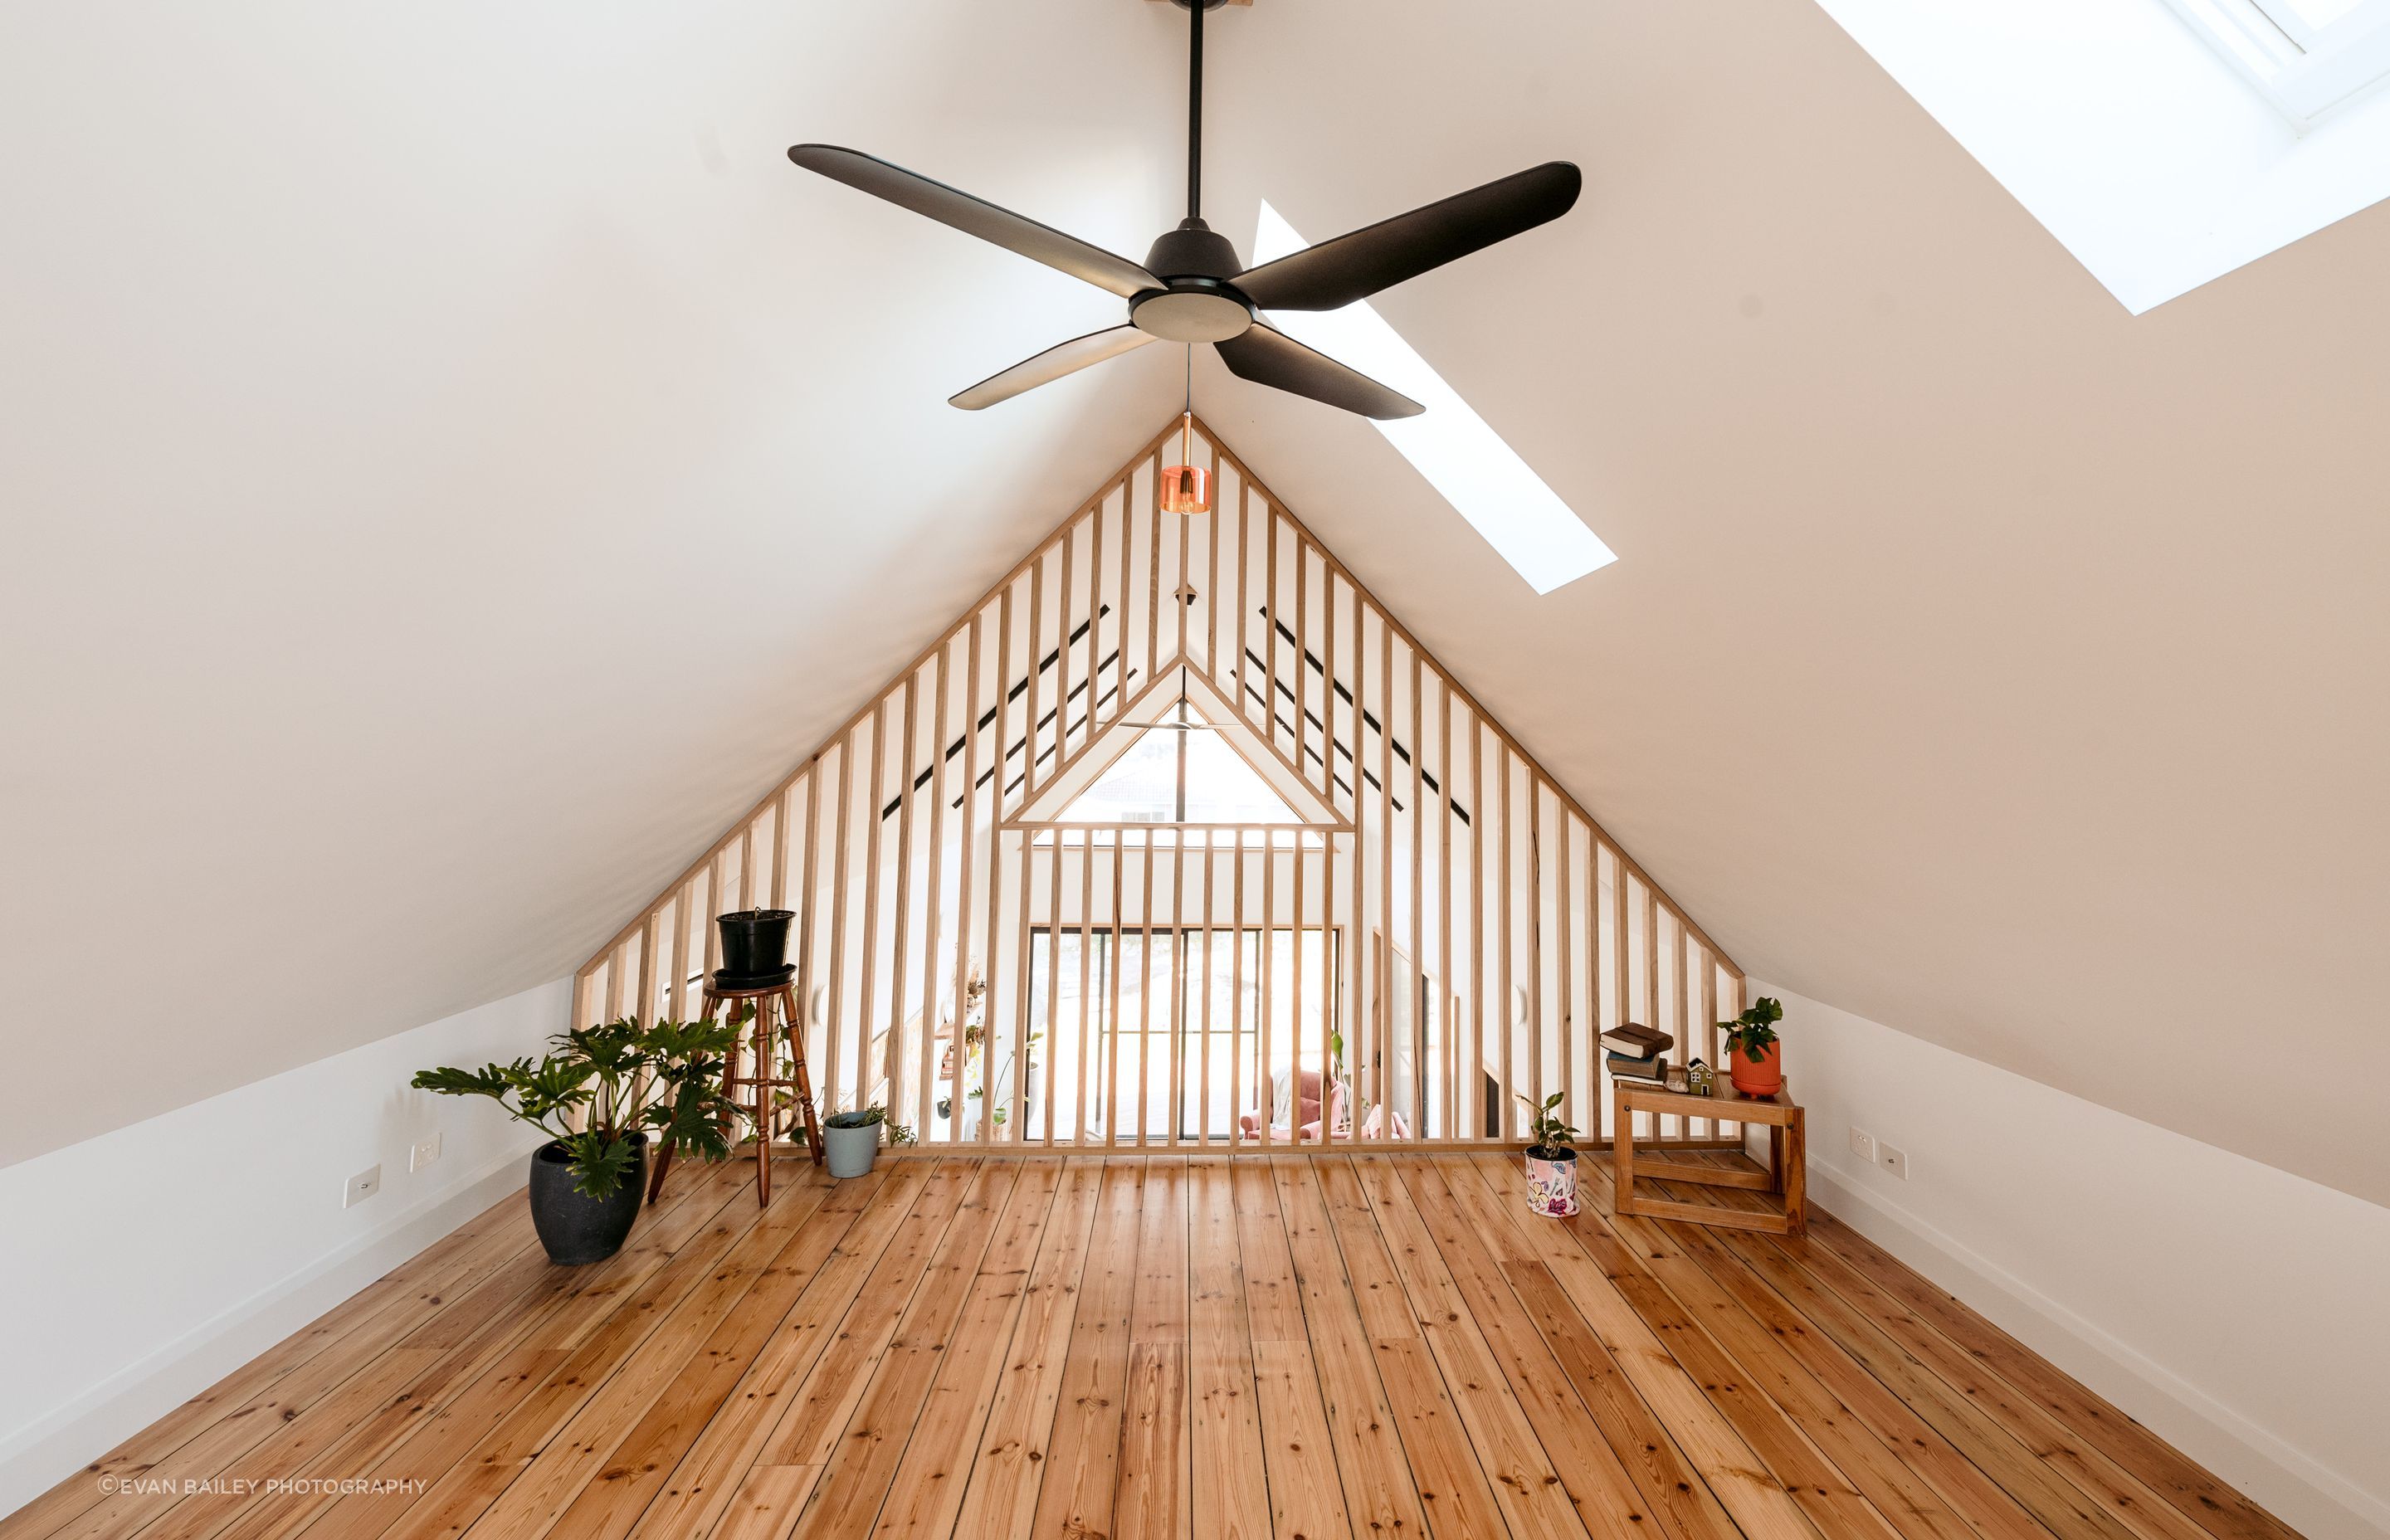 The loft flooring is recycled floorboards from the original asbestos shack on the property.